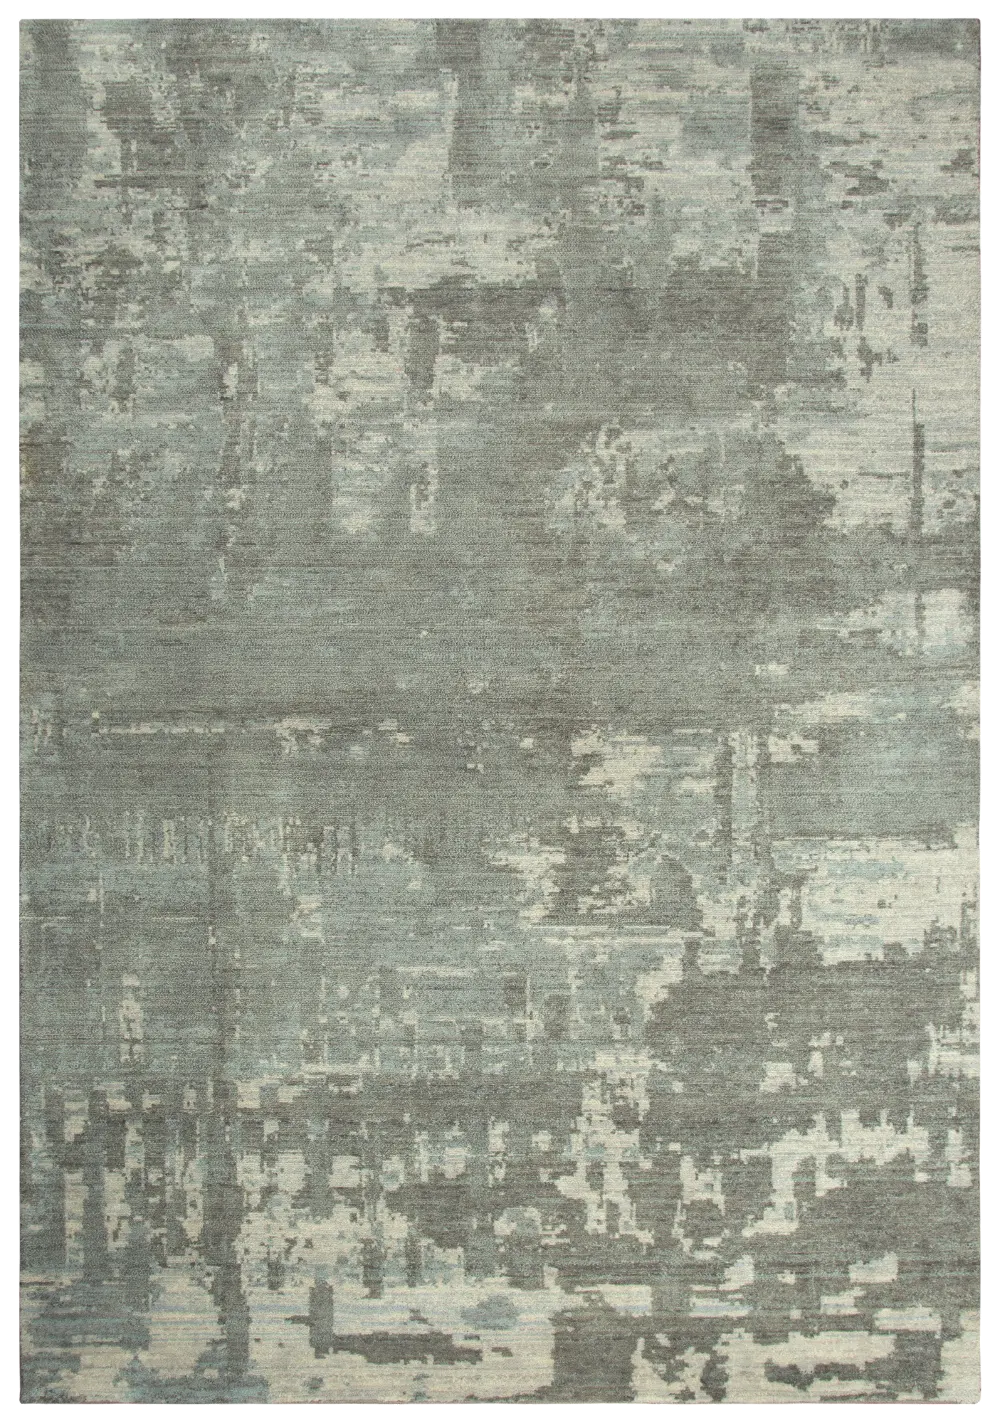 8 x 10 Large Traditional Gray and Beige Area Rug - Gossamer-1